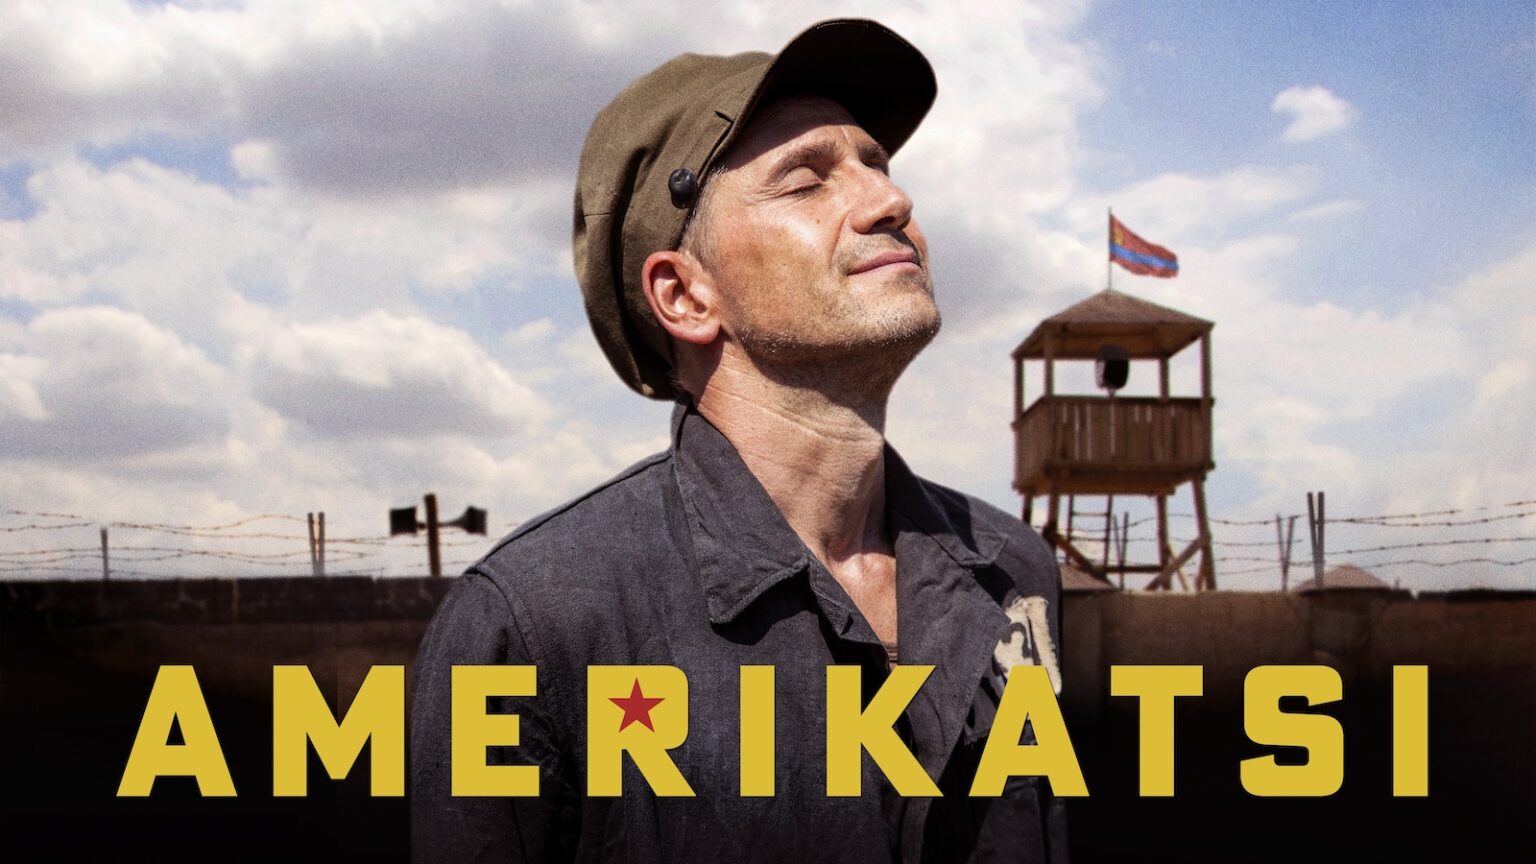 Come watch AMERIKATSI this Sunday night @ 7pm at the Armenian Youth Centre (50 Hallcrown Place) and catch the buzz. Director and the star of the film, Michael Goorjian, will be joining us live virtually for this exclusive POMcore screening about his movie dedicated to his late grandfather.